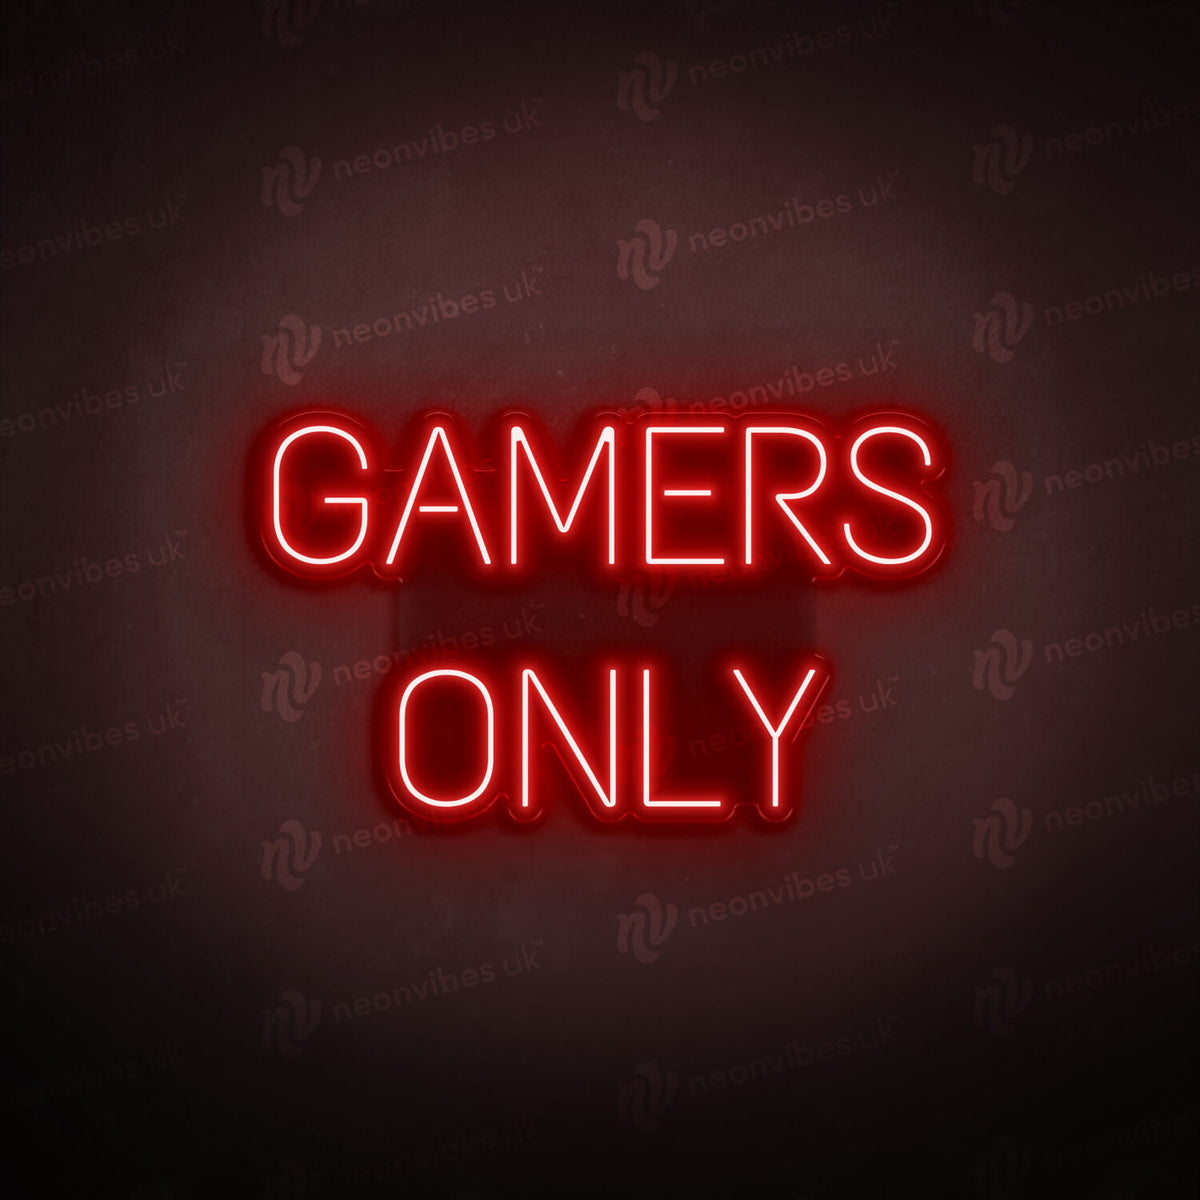 Gamers only neon sign